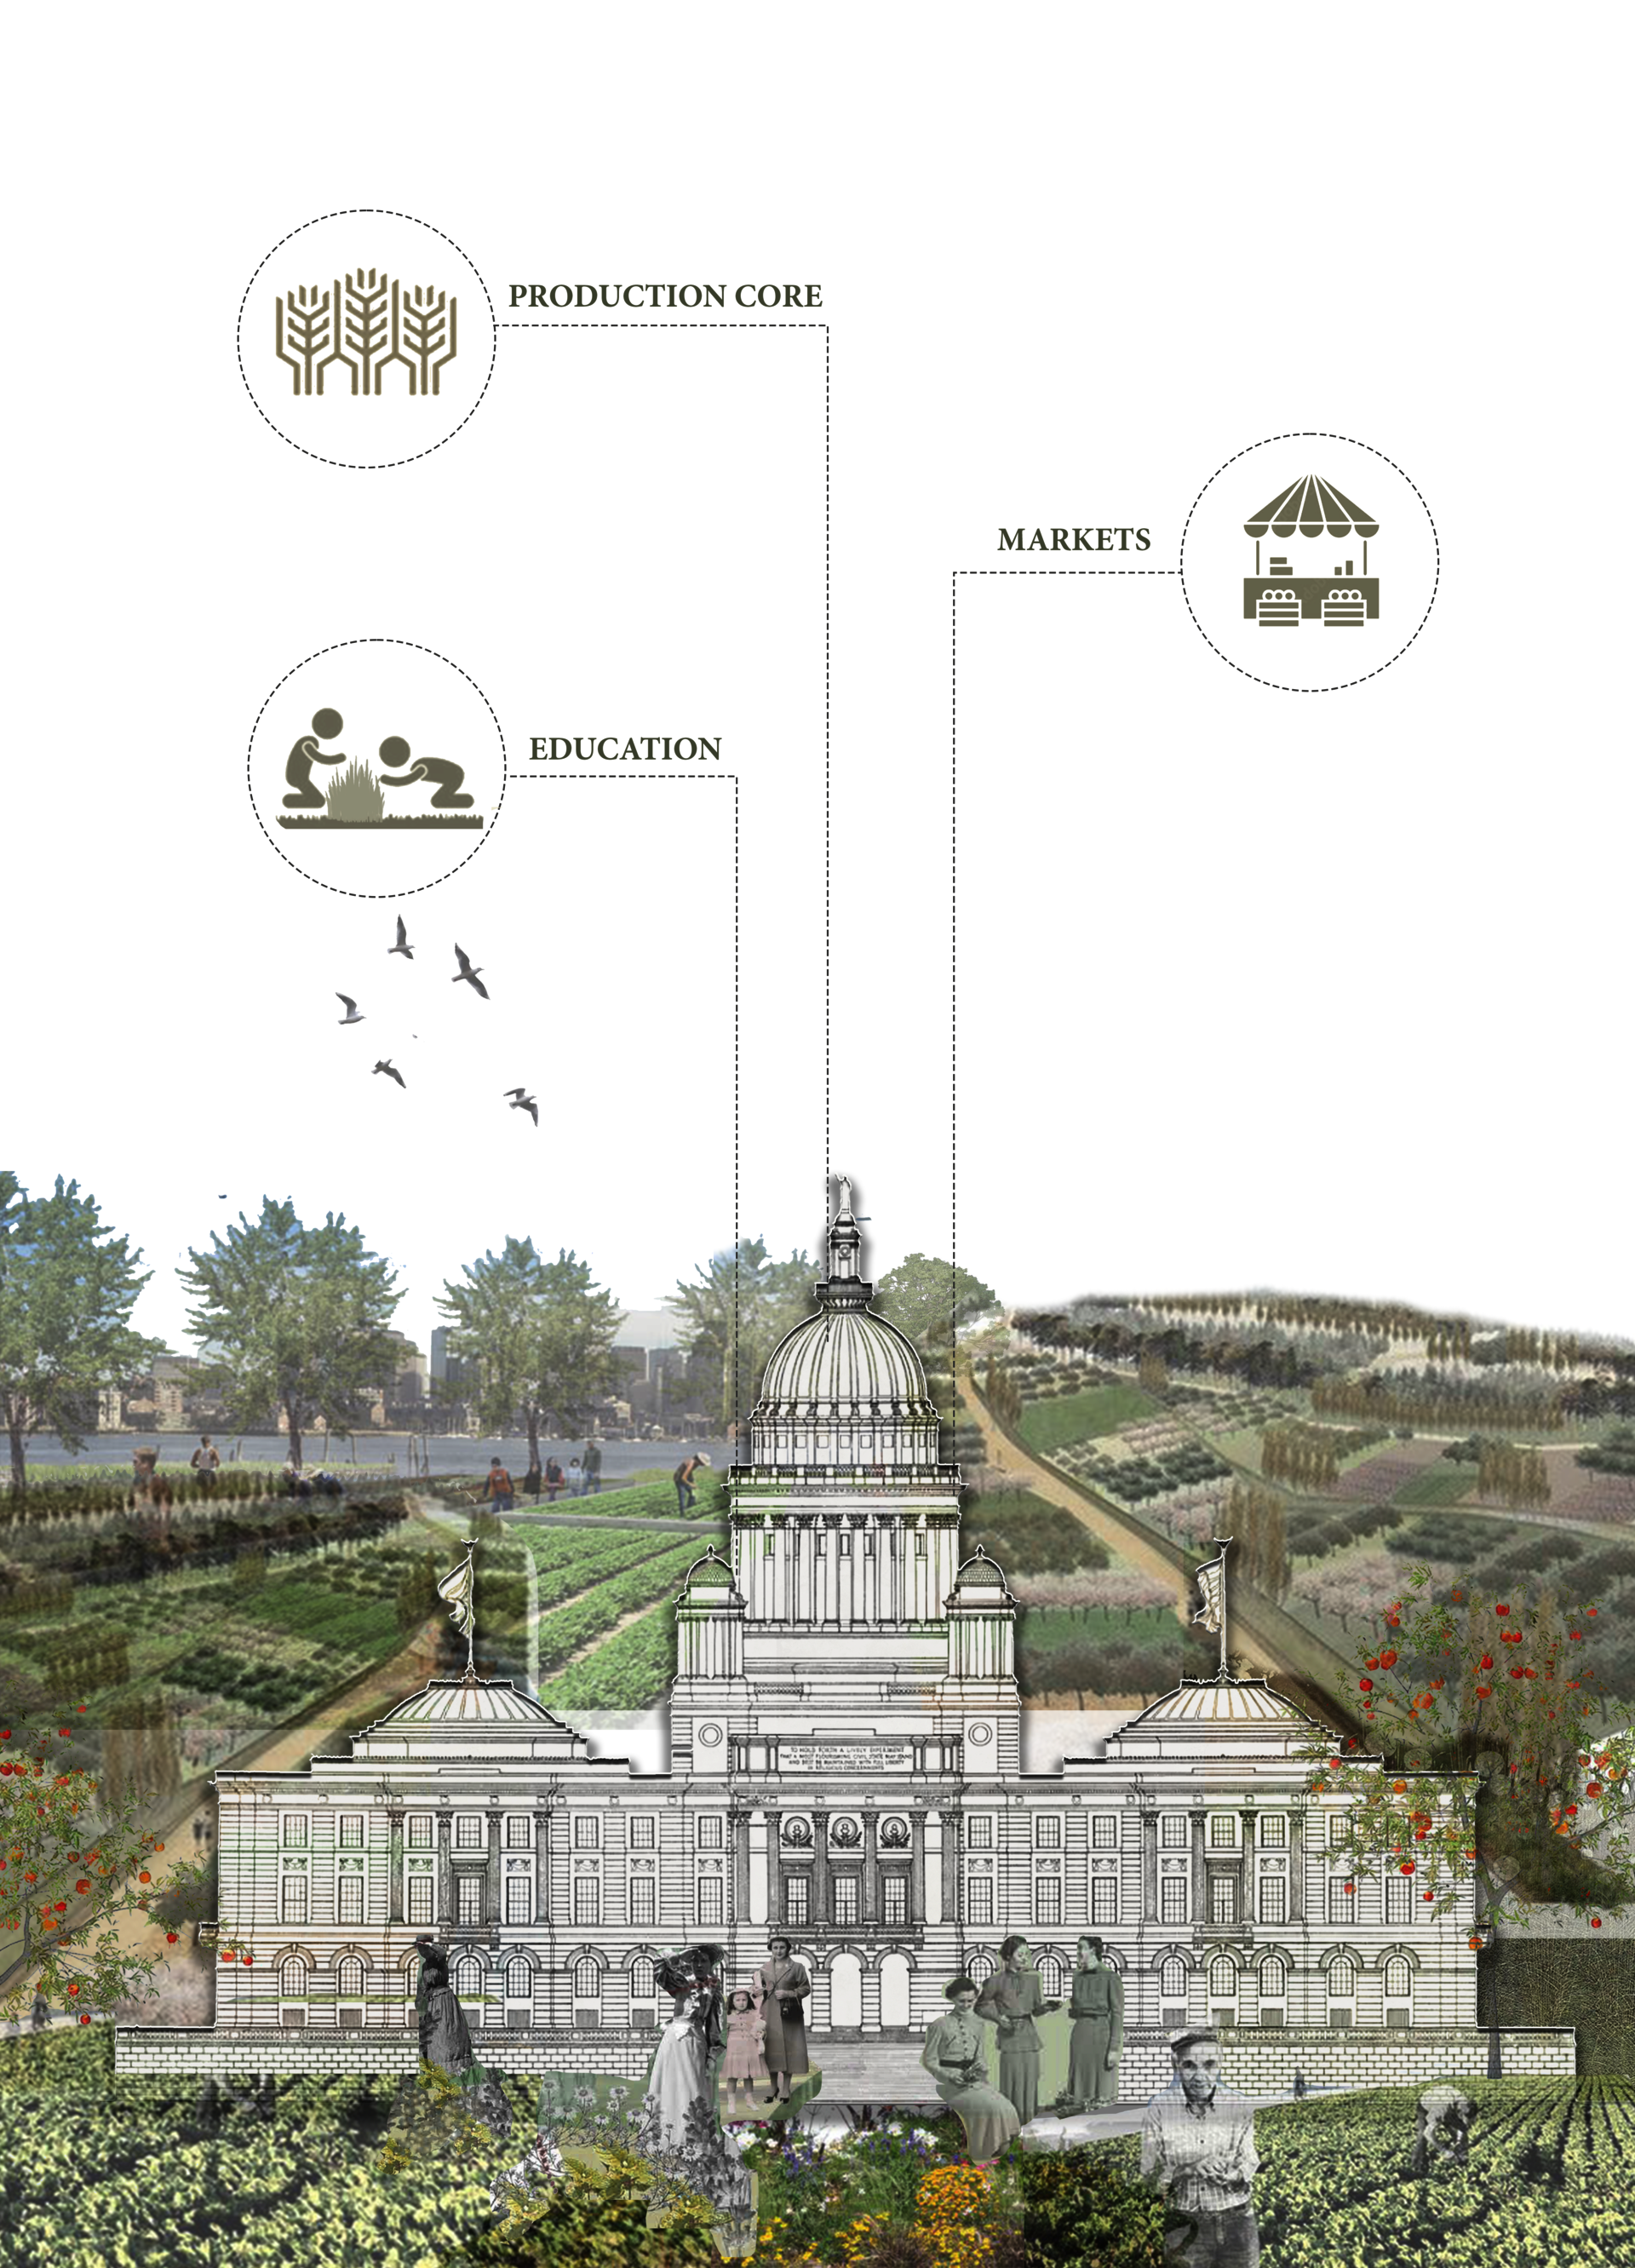 The State House functions as a workplace for the council and legislative members and there is a dire need for tactical interventions that benefit local communities highlighting this majestic structure as the house of the people. Here, we celebrate the Rhode Island’s rich tapestry through its food culture.